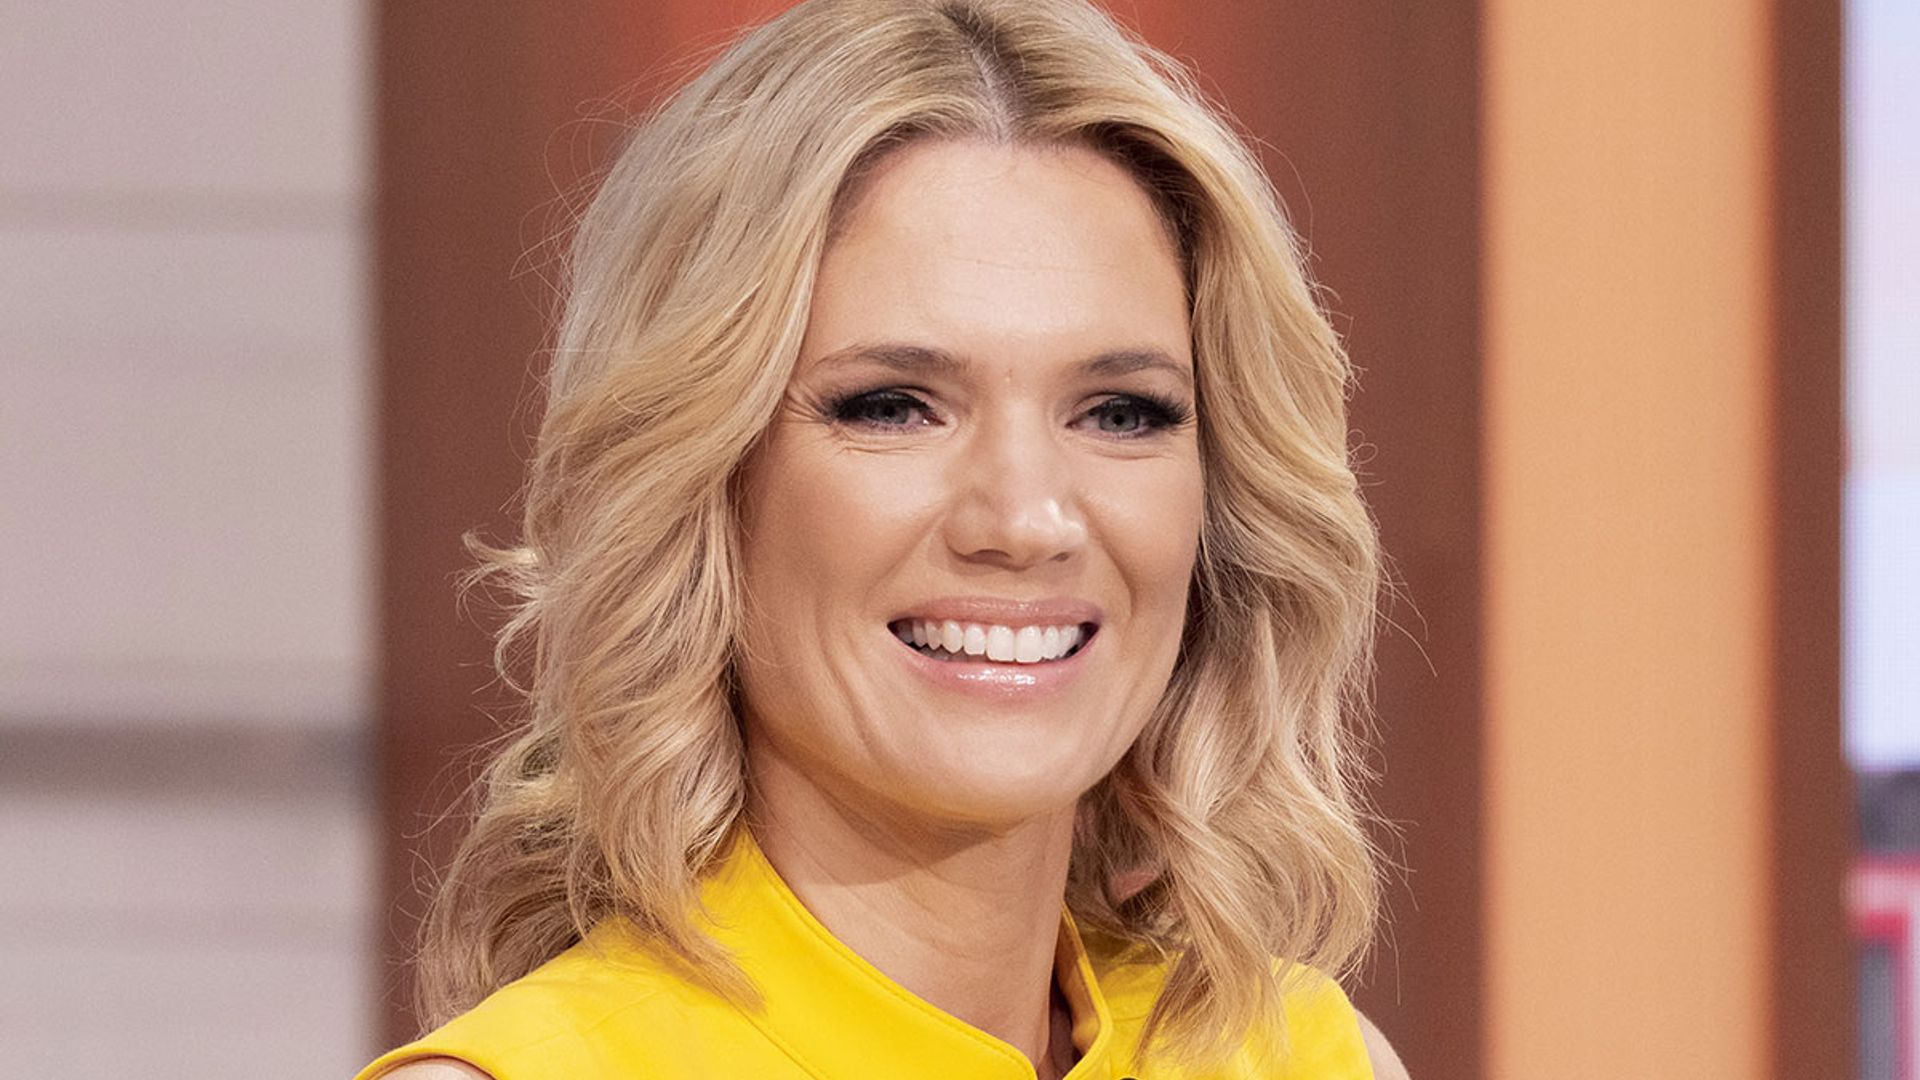 Charlotte Hawkins commands attention in bold sunshine yellow dress